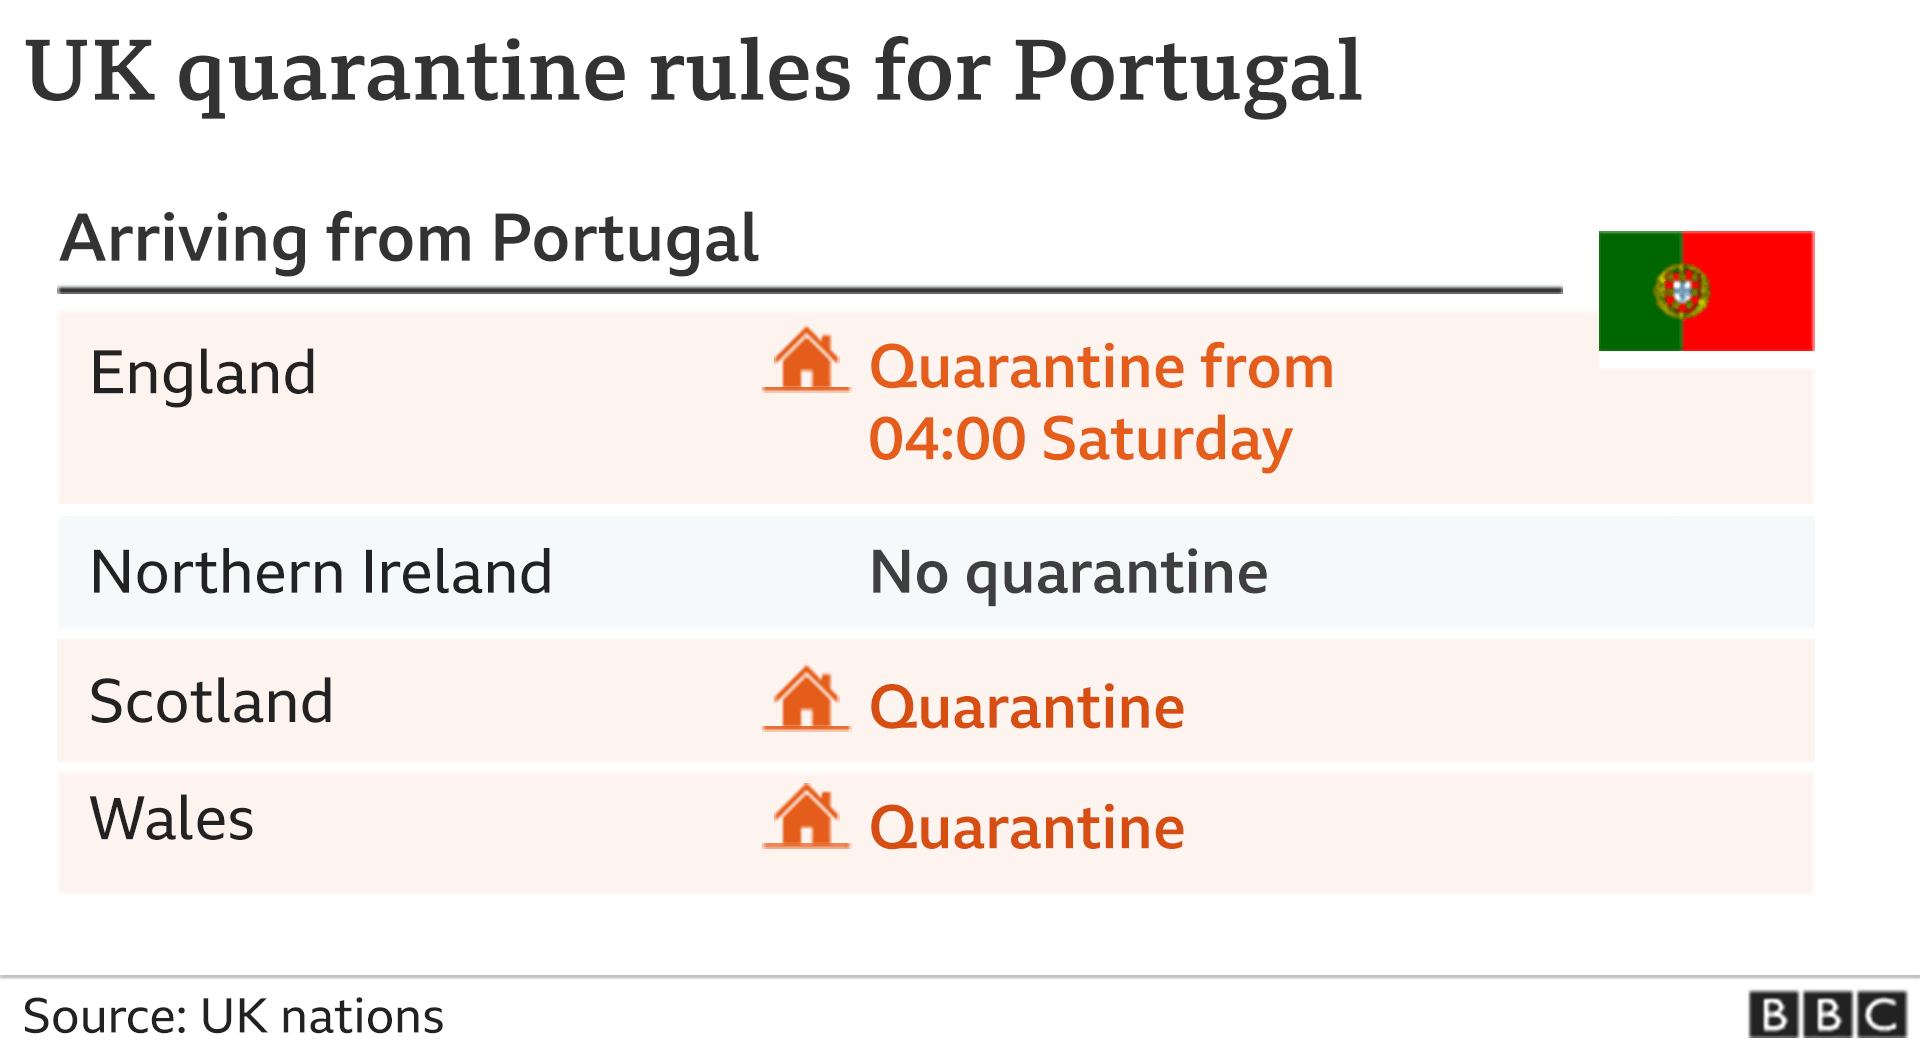 Graphic showing UK quarantine rules for Portugal